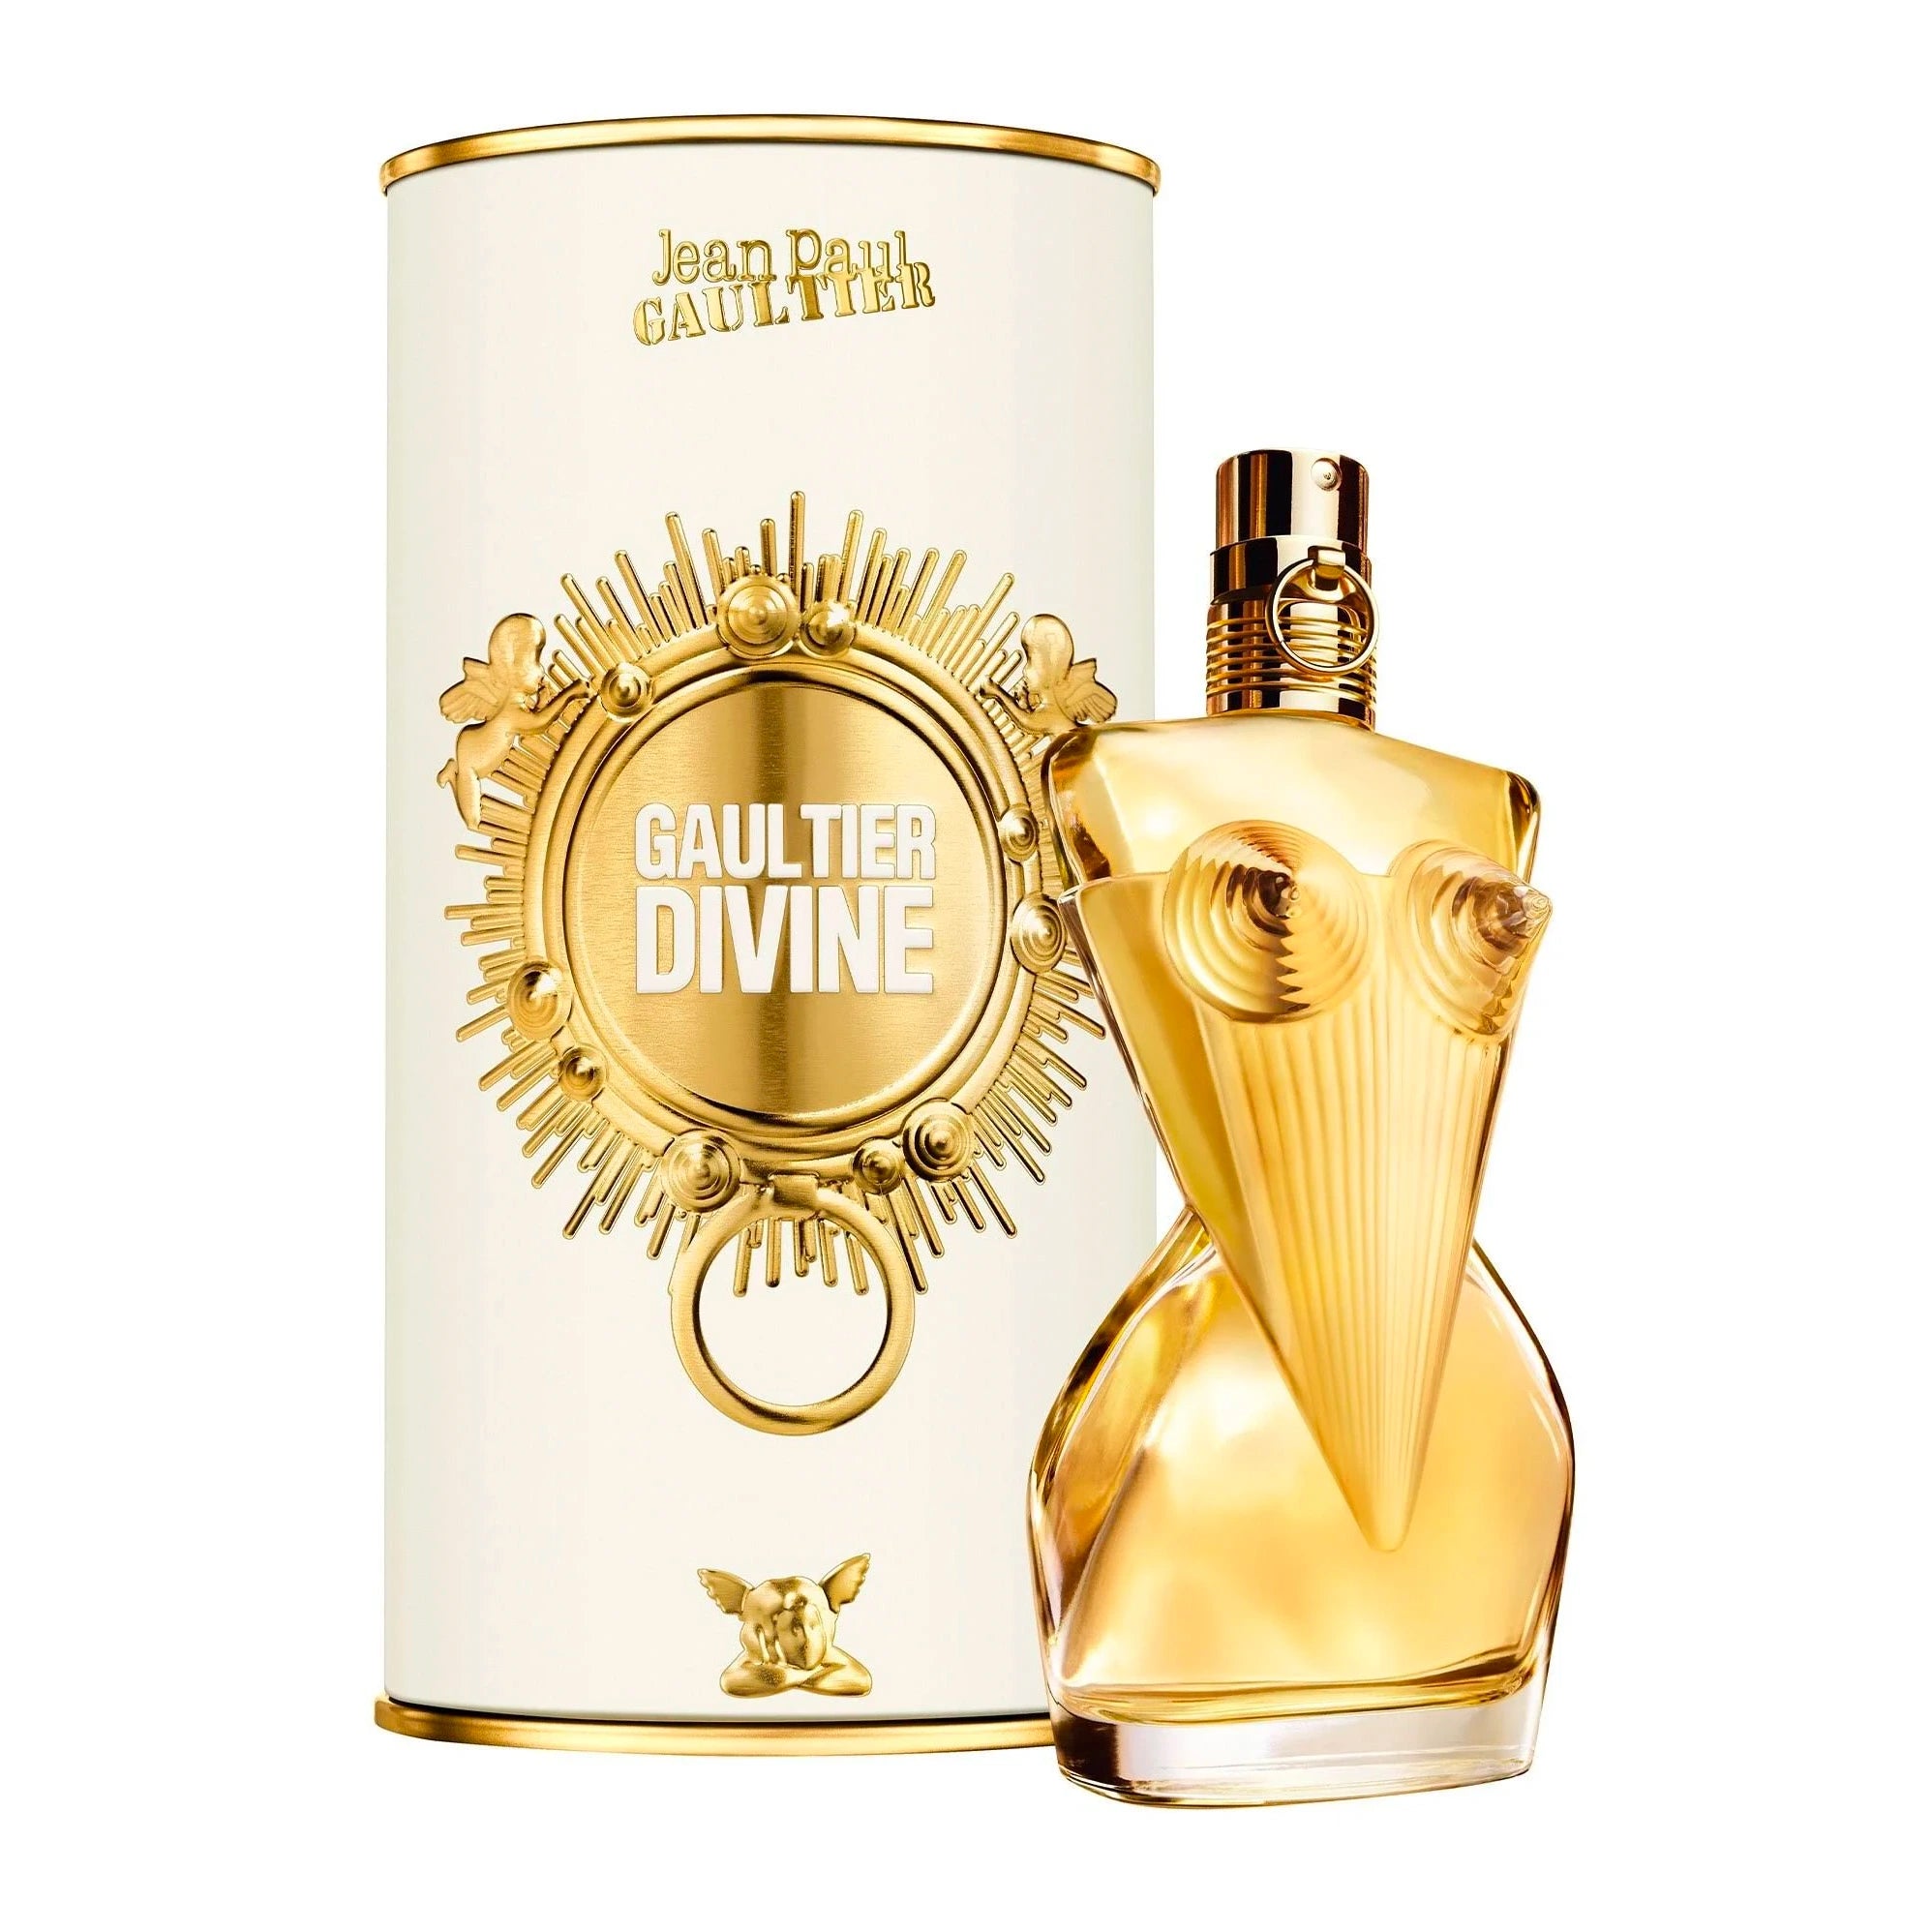 <p>Experience the divine beauty of womanhood with Jean Paul Divine EDP. Masterfully crafted by Quentin Bisch, this fragrance blends scents of lily and marine for a unique aroma that celebrates natural splendor. Inspired by Gaultier's iconic corset, it's a reminder for women to appreciate themselves and each other.</p>